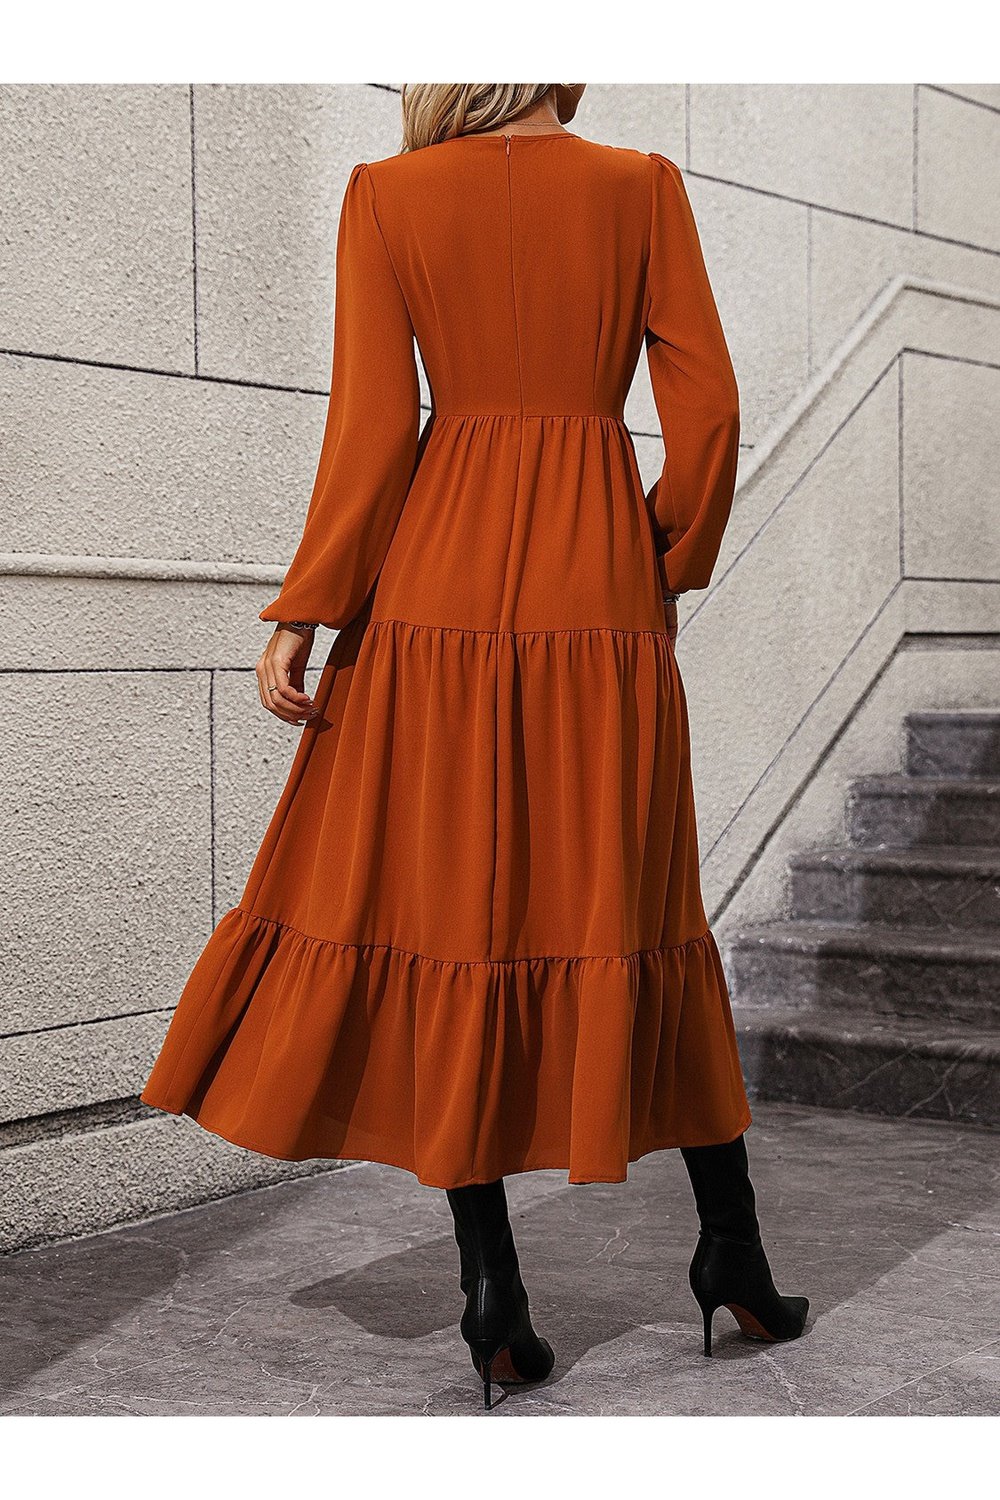 V-Neck Long Sleeve Tiered Dress - Casual & Maxi Dresses - FITGGINS